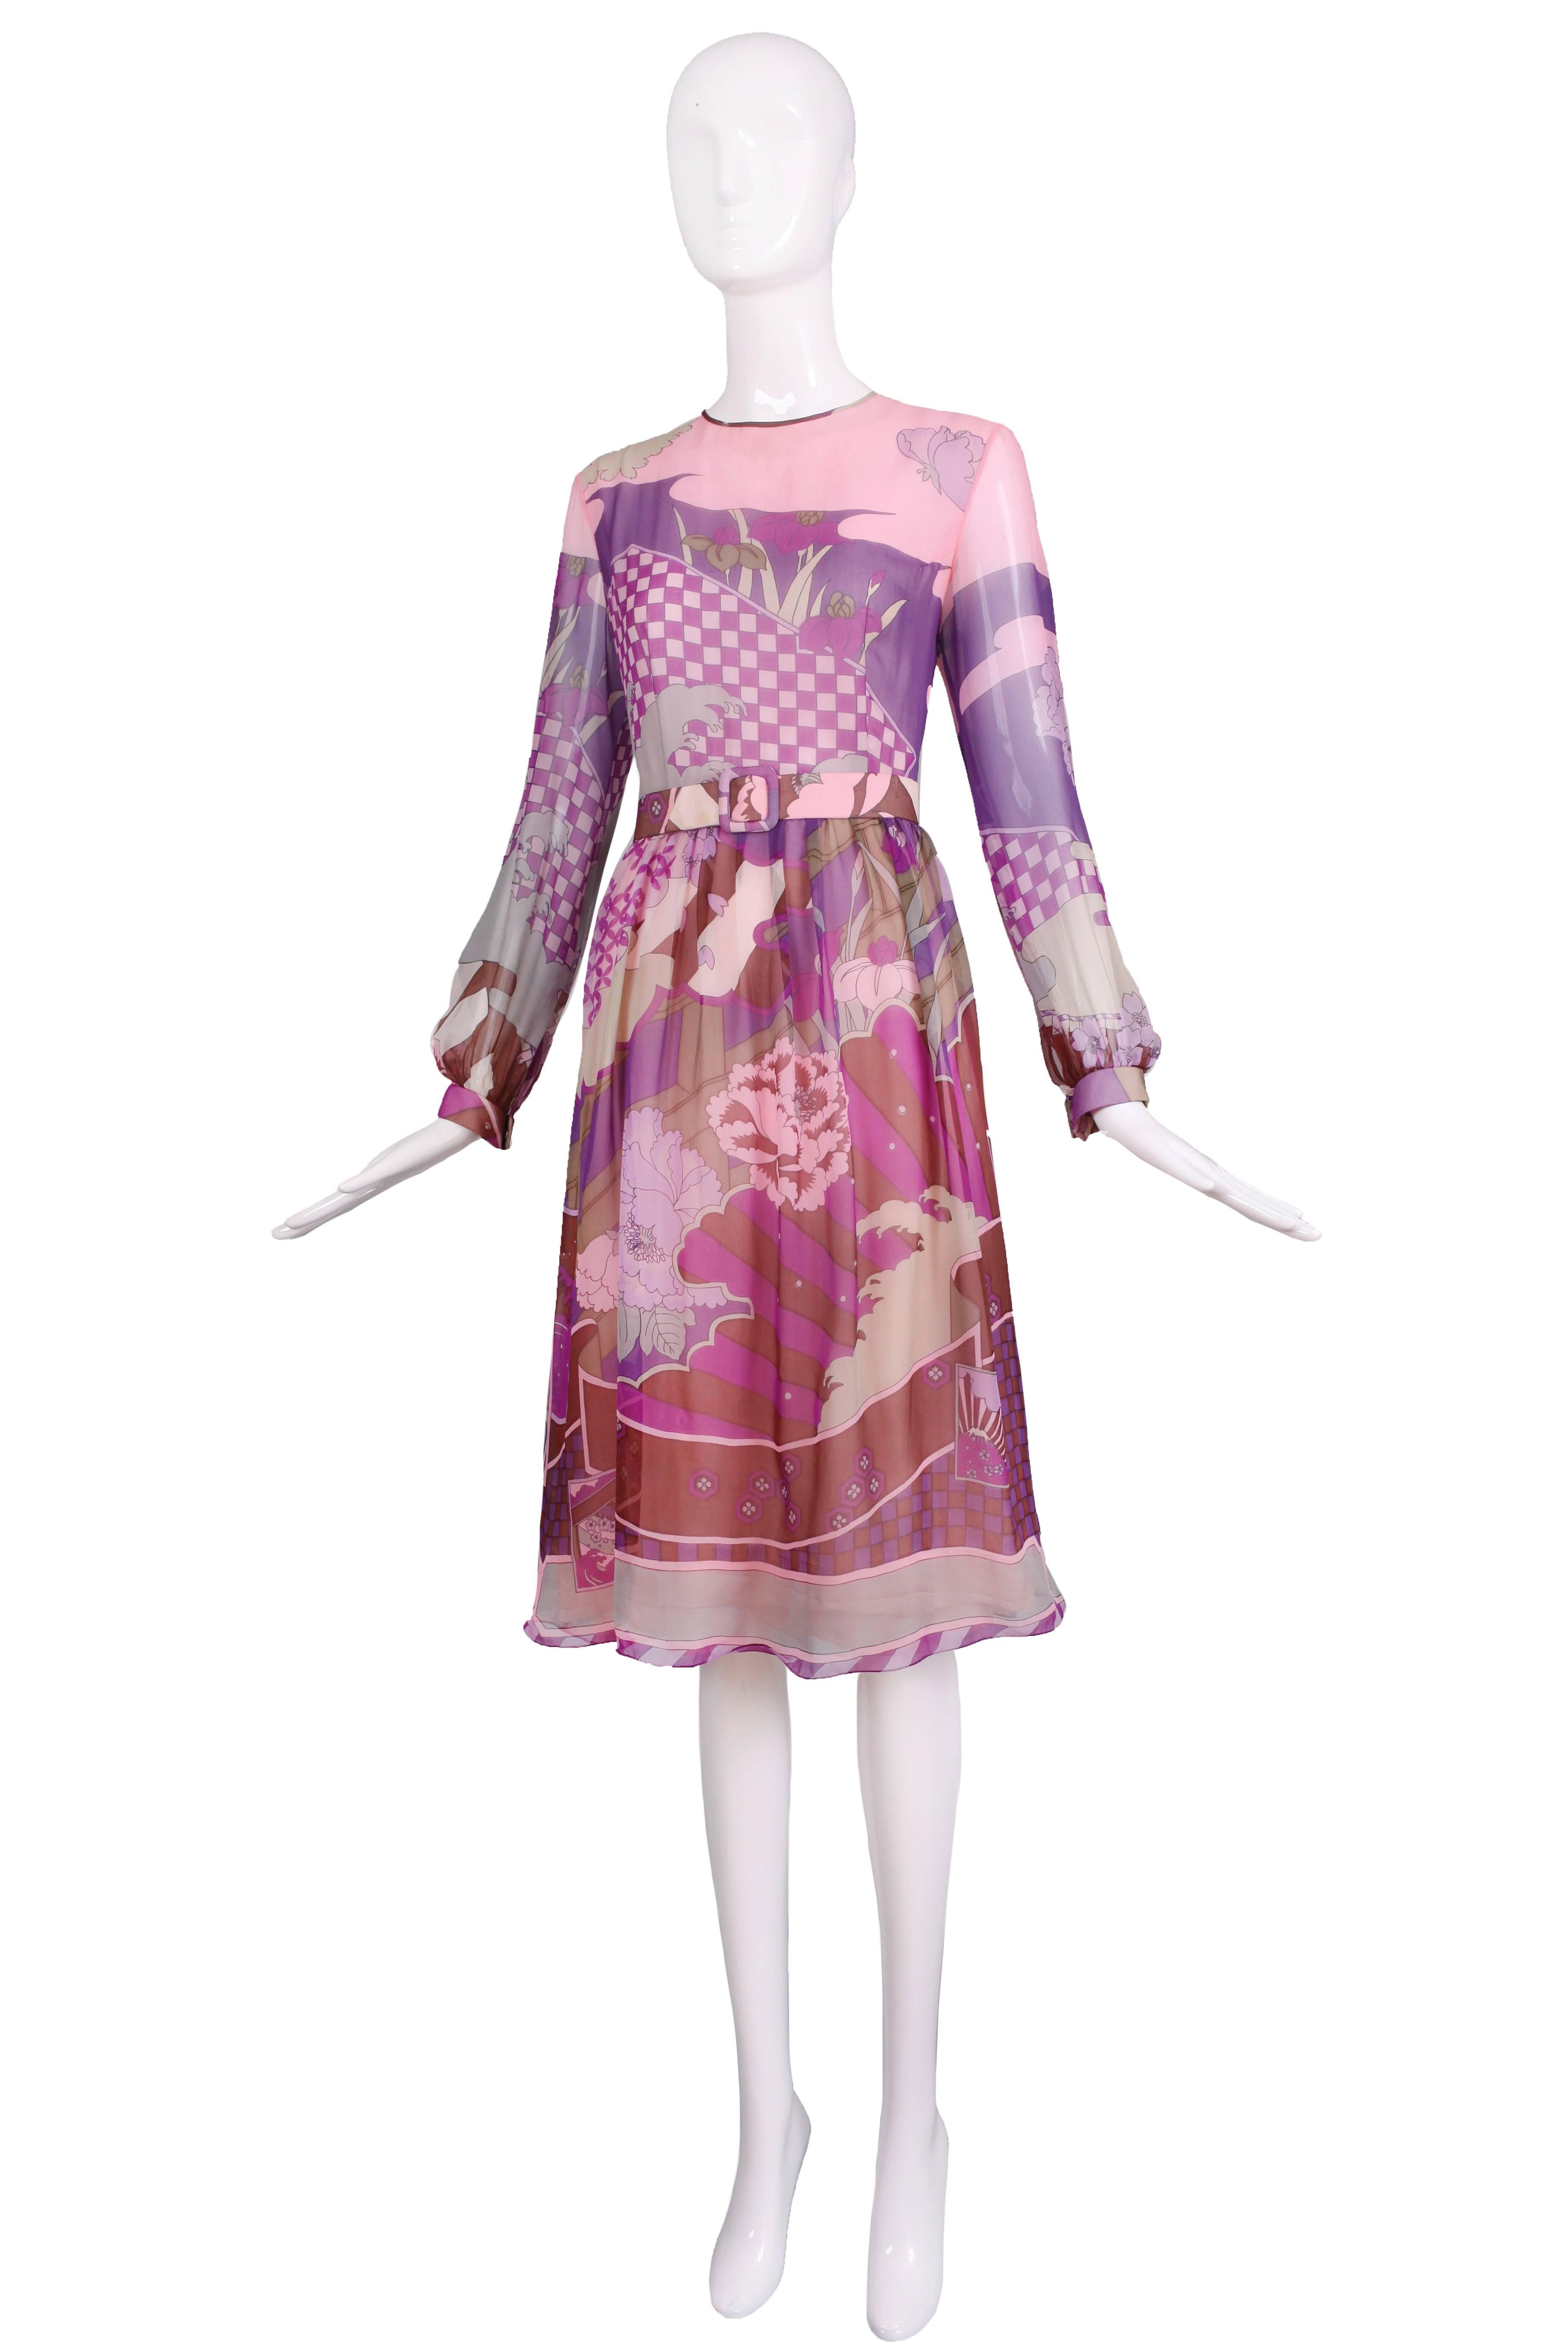 Hanae Mori couture chiffon double layered chiffon printed day dress with matching belt. Tag size 8. In very good to excellent condition with a handful of light spots and a few pulls at the front that are more the nature of the fabric than a defect.